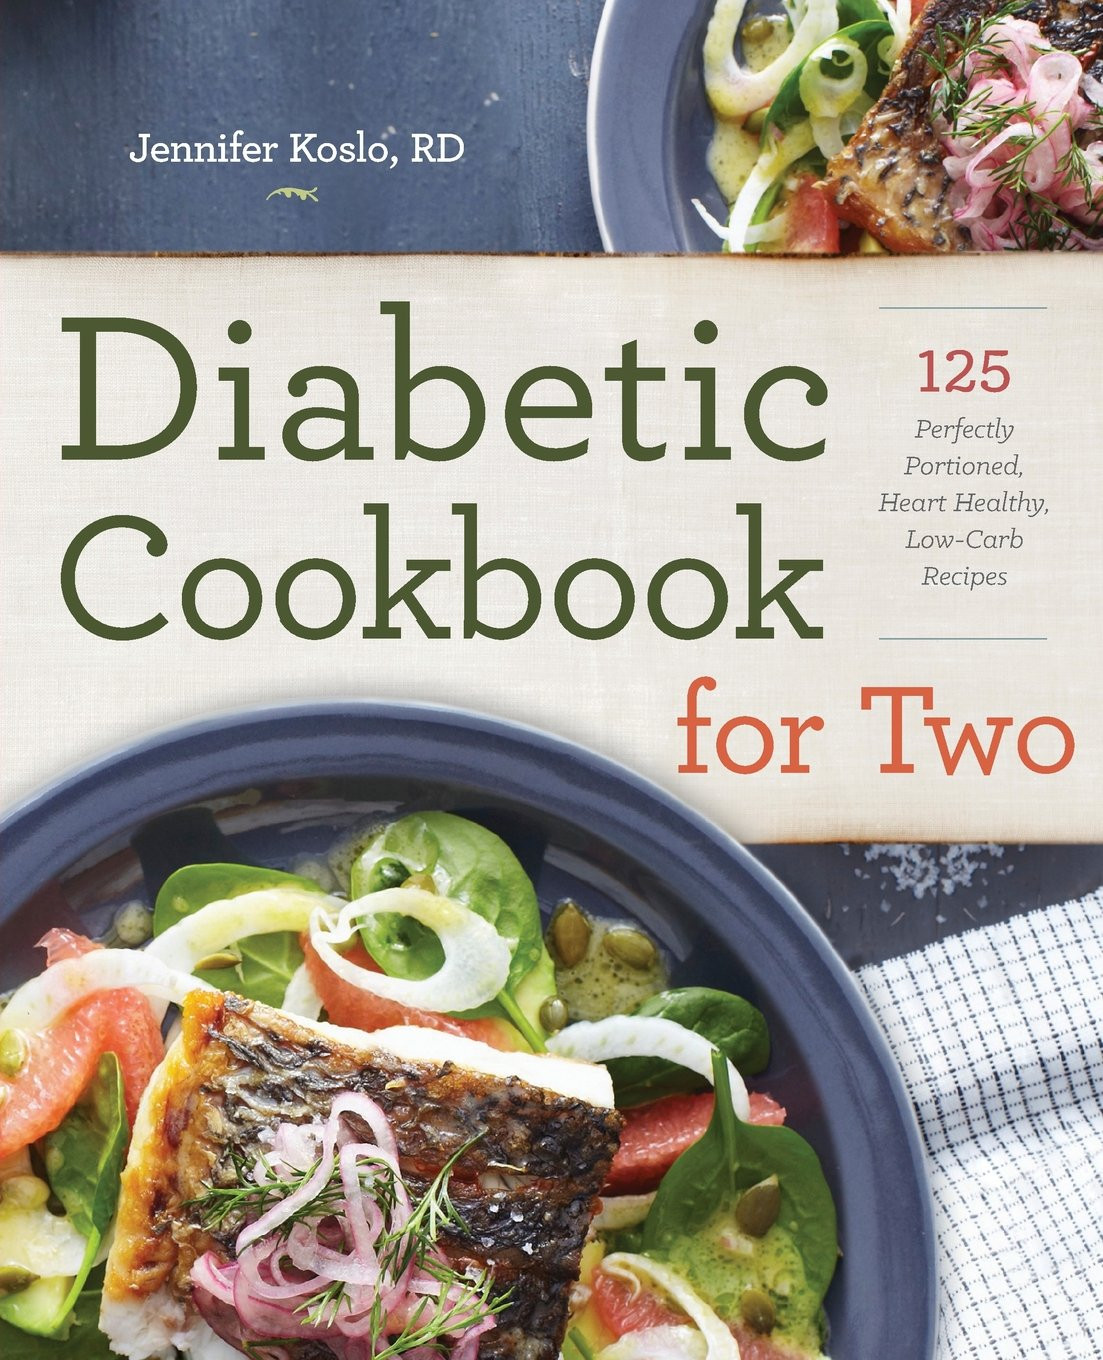 Heart Healthy Recipes For Two
 Diabetic Cookbook for Two 125 Perfectly Portioned Heart